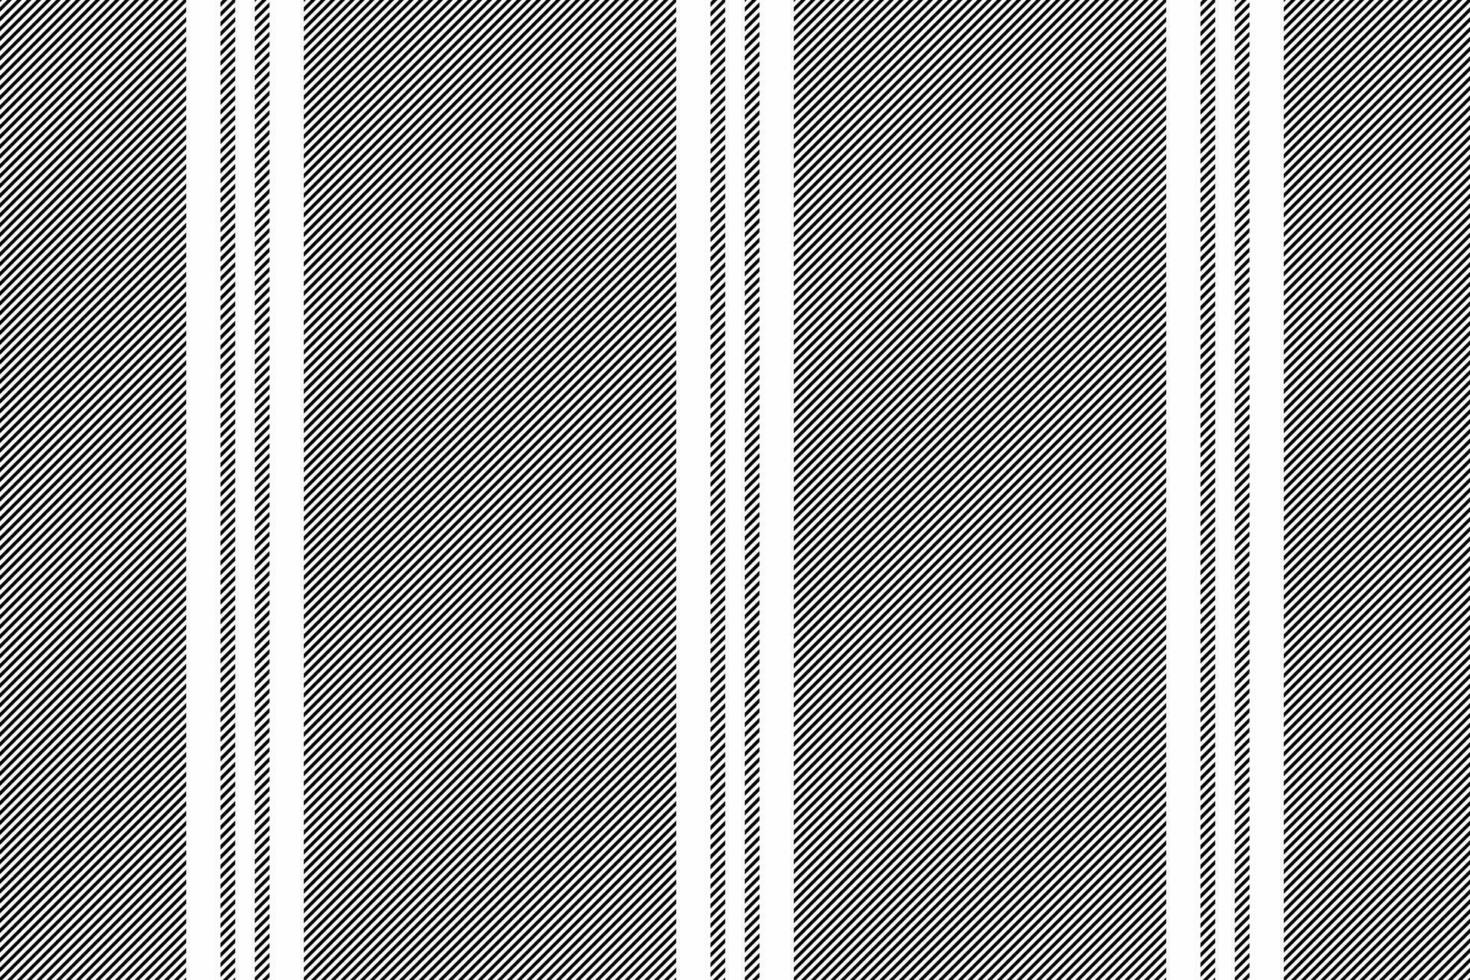 Lines background stripe of seamless fabric textile with a vector texture pattern vertical.